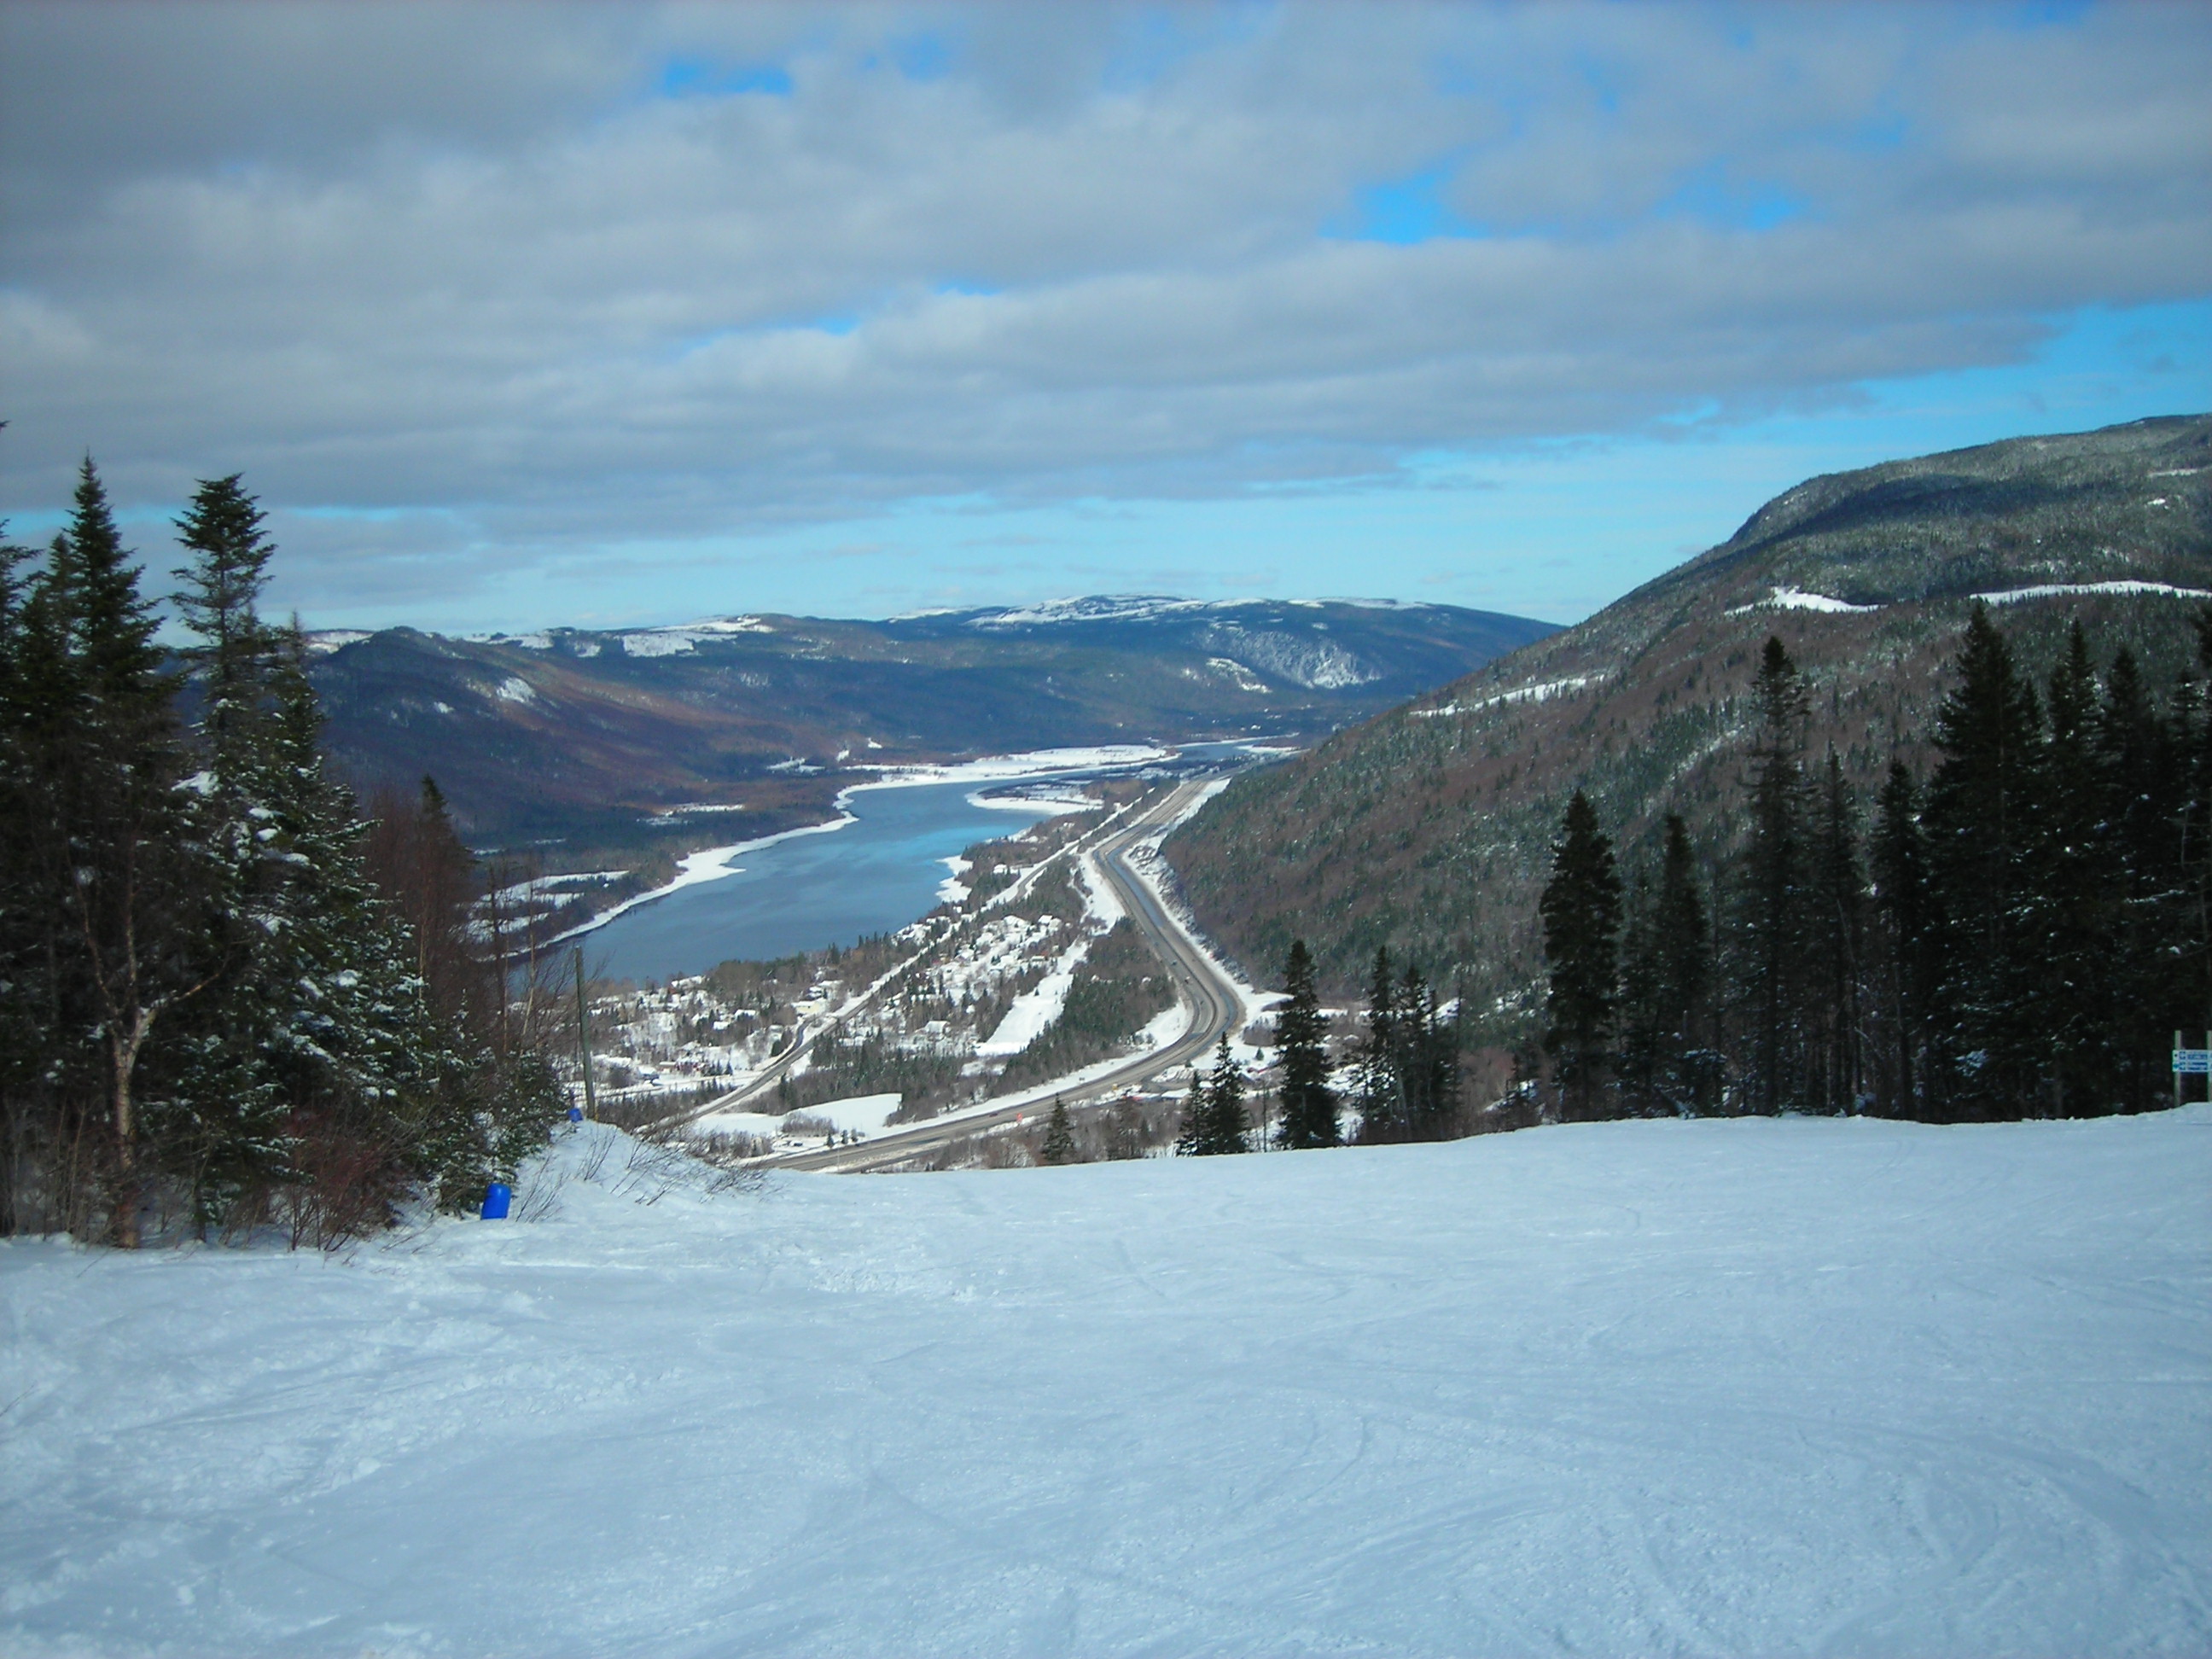 Marble Mountain Ski View of Humber River